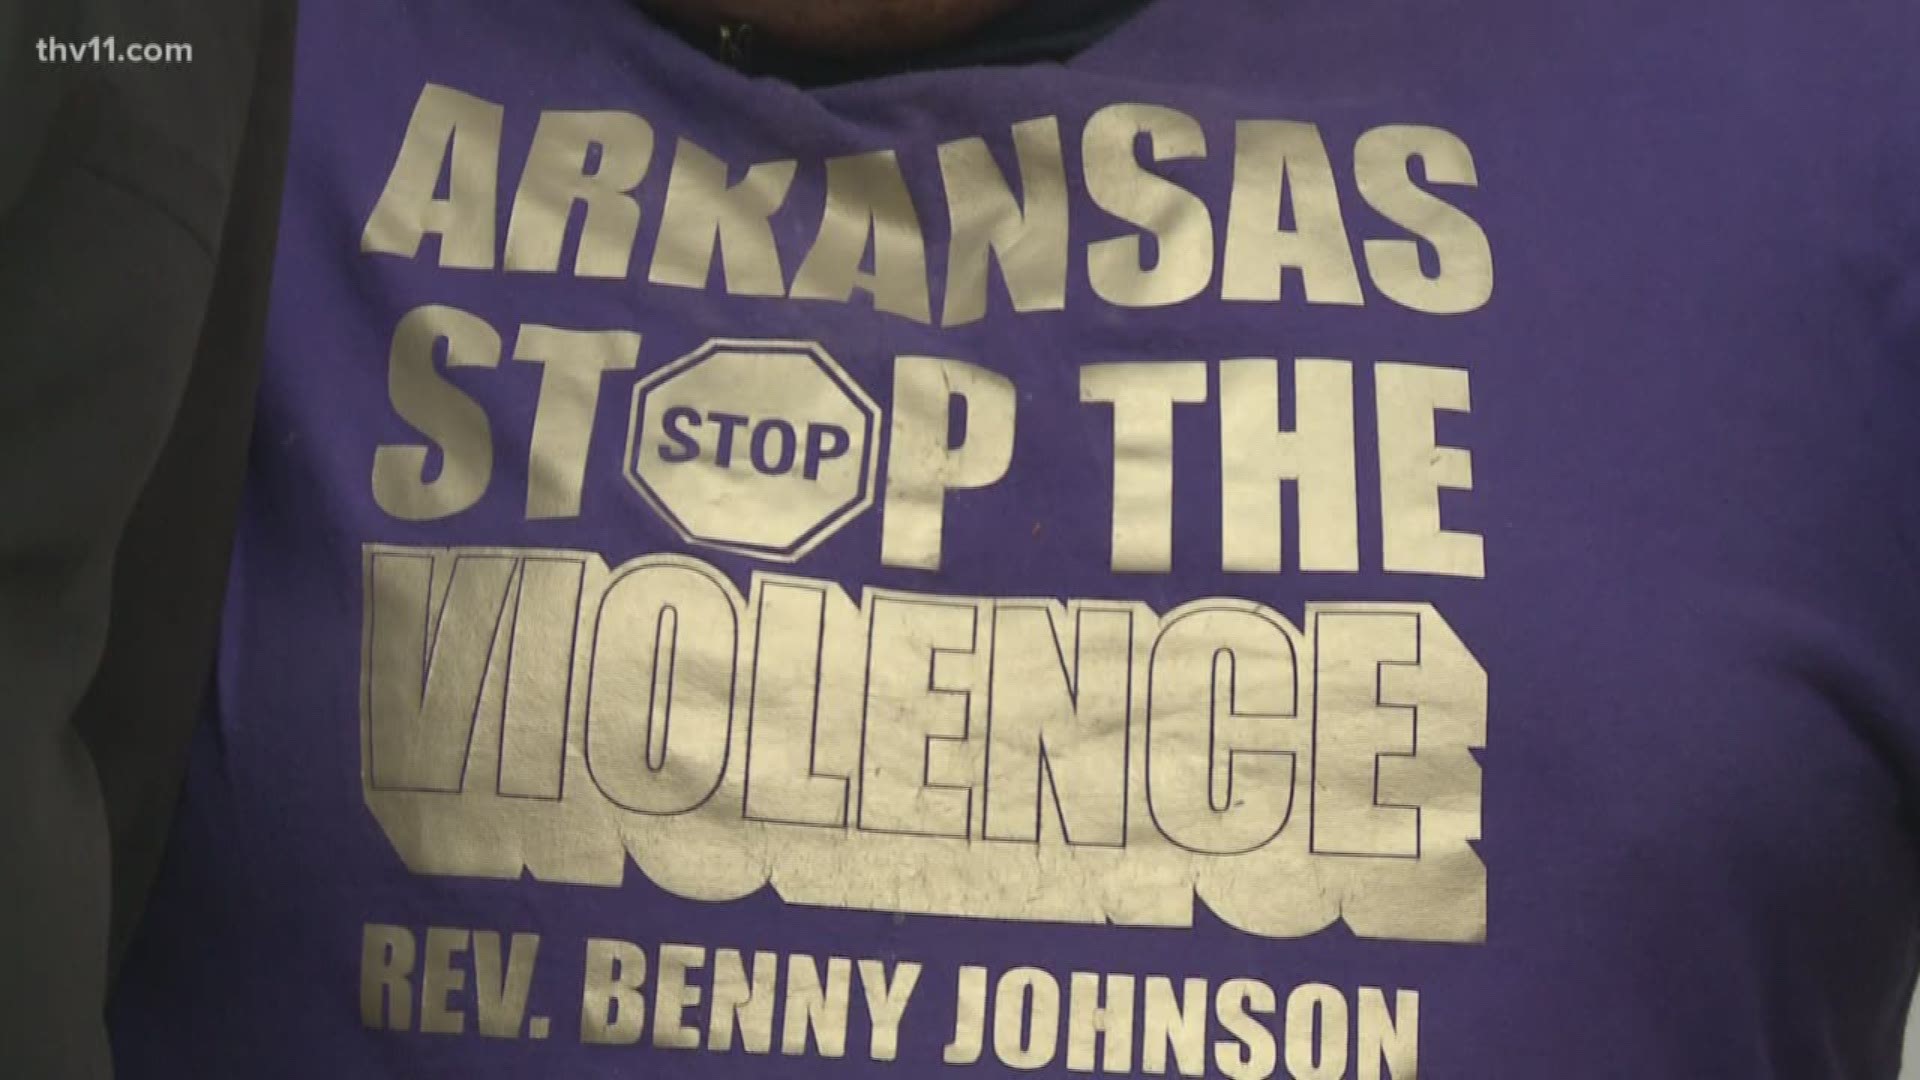 The group 'Arkansas Stop the Violence' says it's teaming up with churches along the 12th Street corridor in an effort to stop violent crimes.